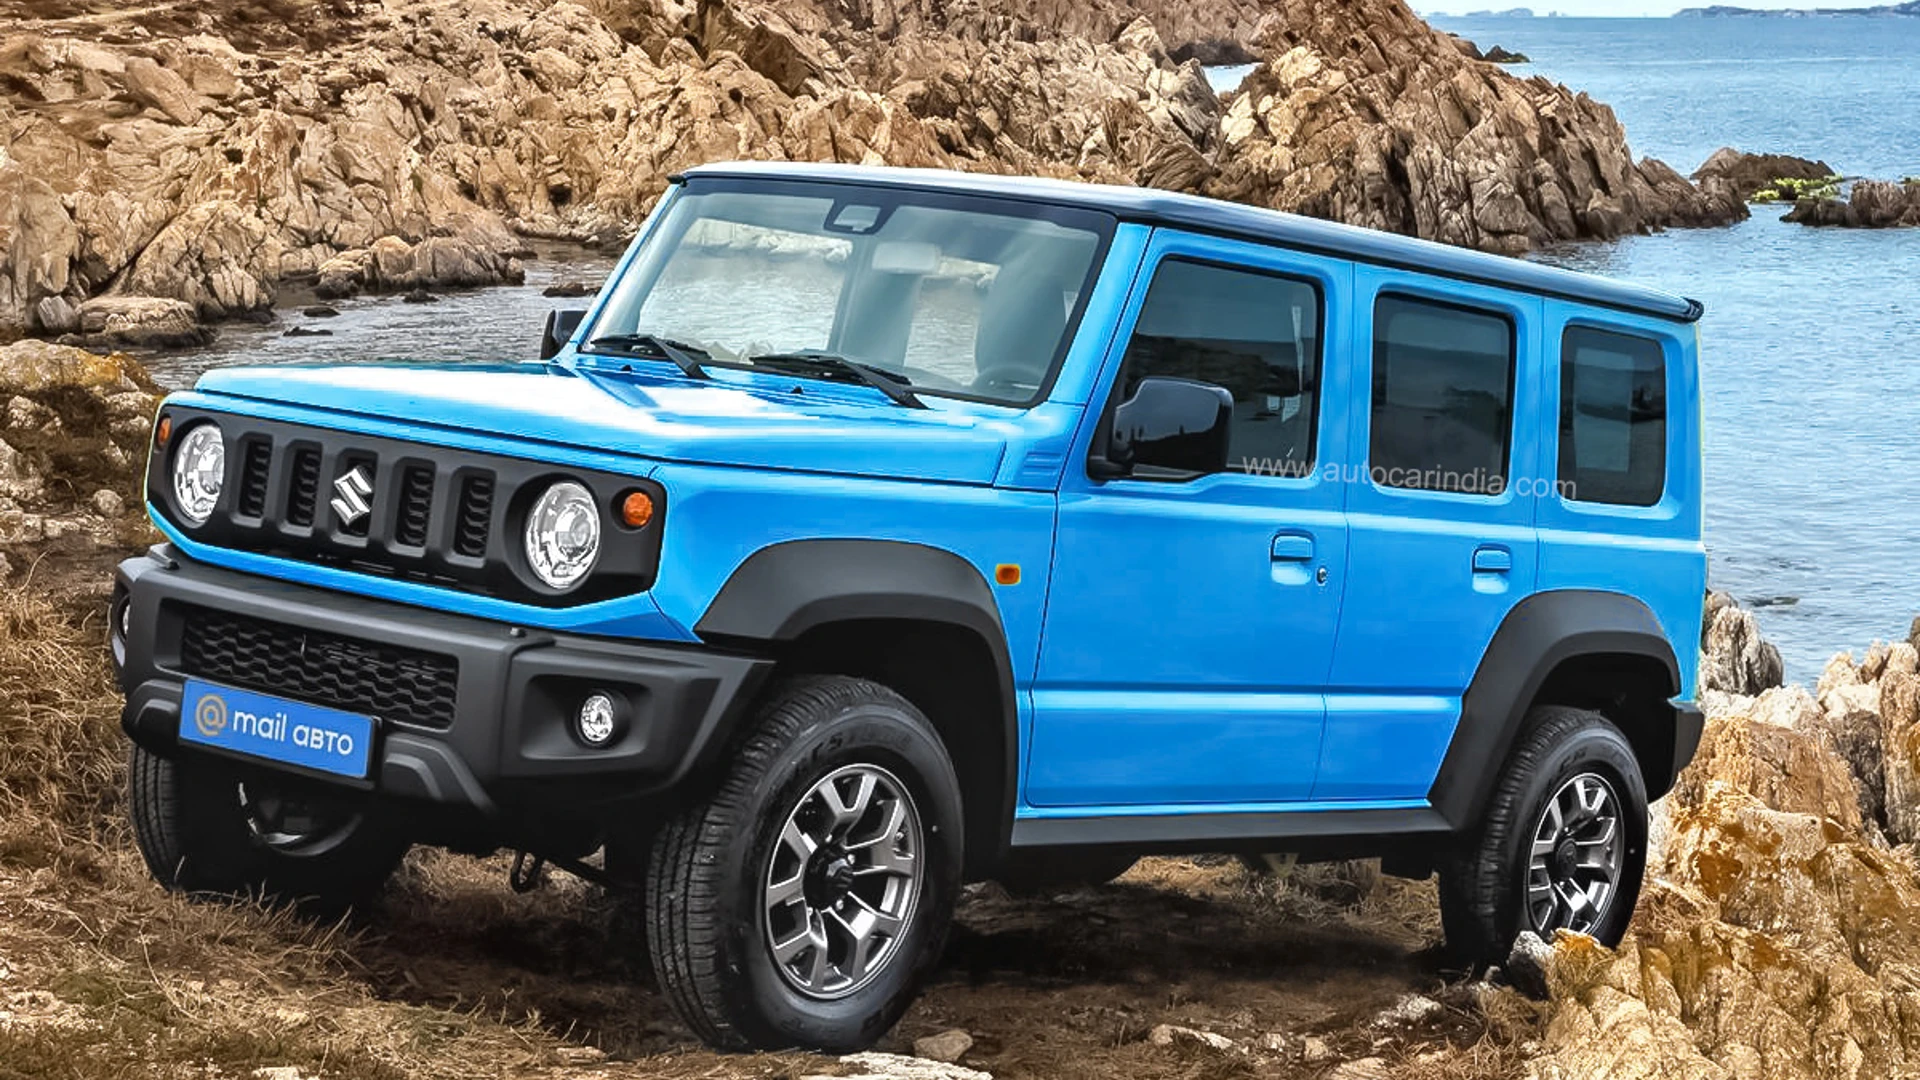 Maruti Suzuki Jimny 4X4 launched: Prices start from Rs. 12.74 lakh